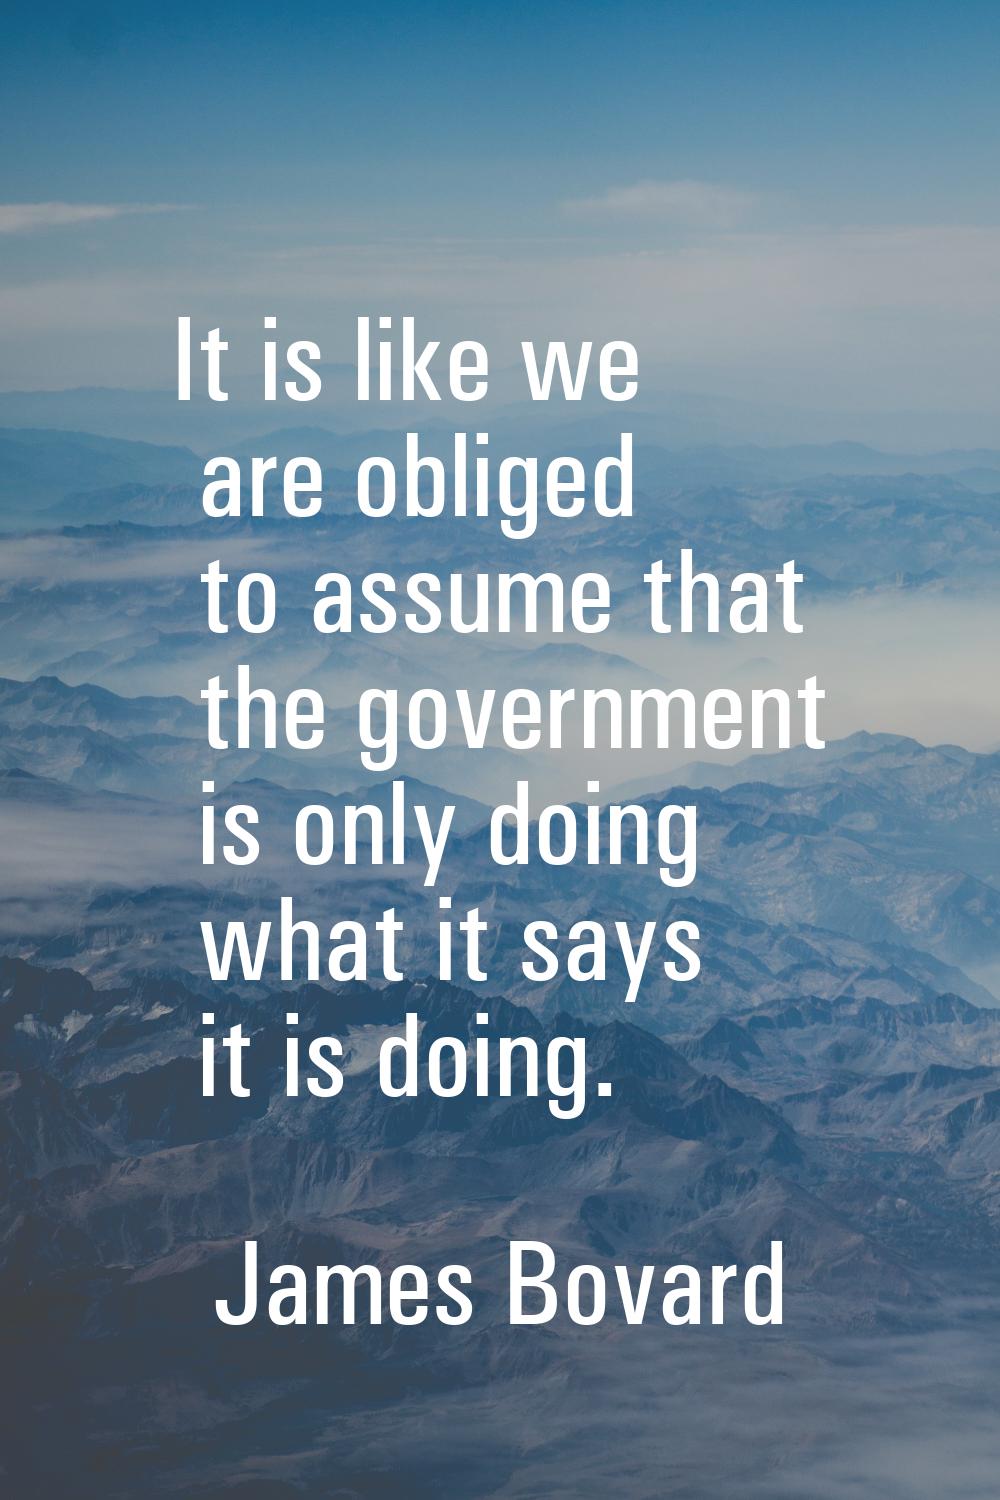 It is like we are obliged to assume that the government is only doing what it says it is doing.